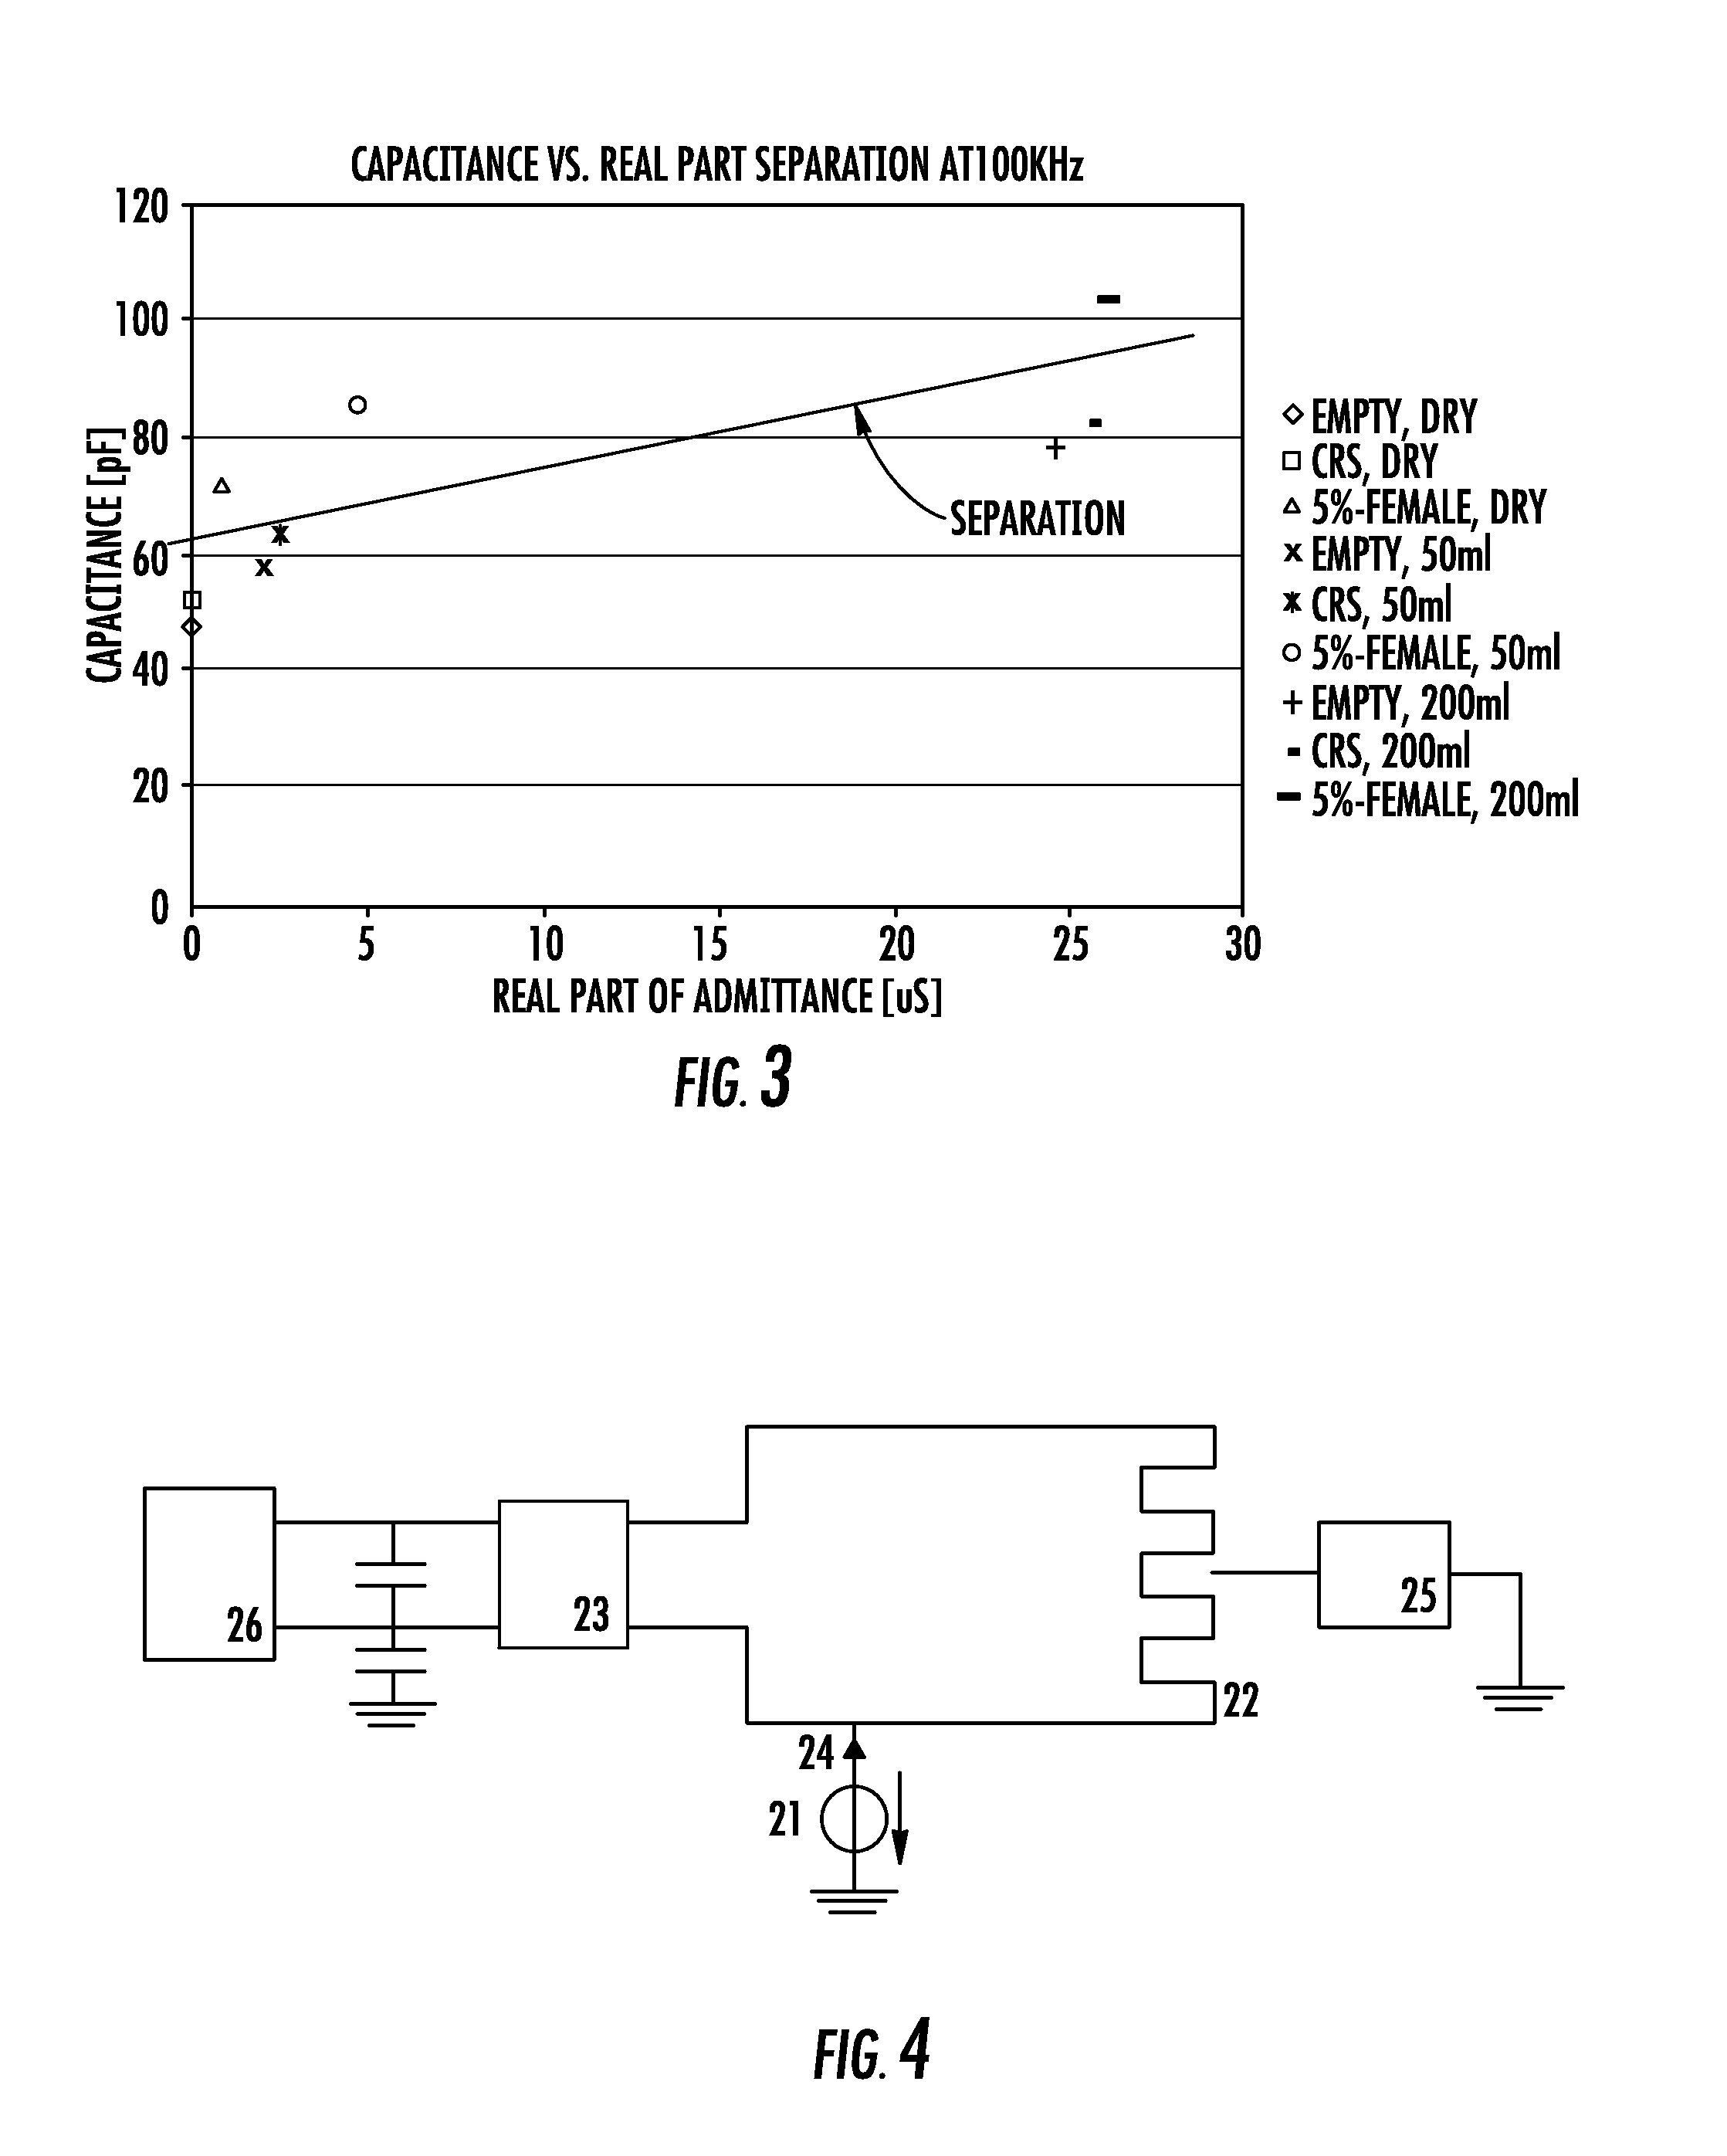 Plural-frequency capacitive occupancy sensing system